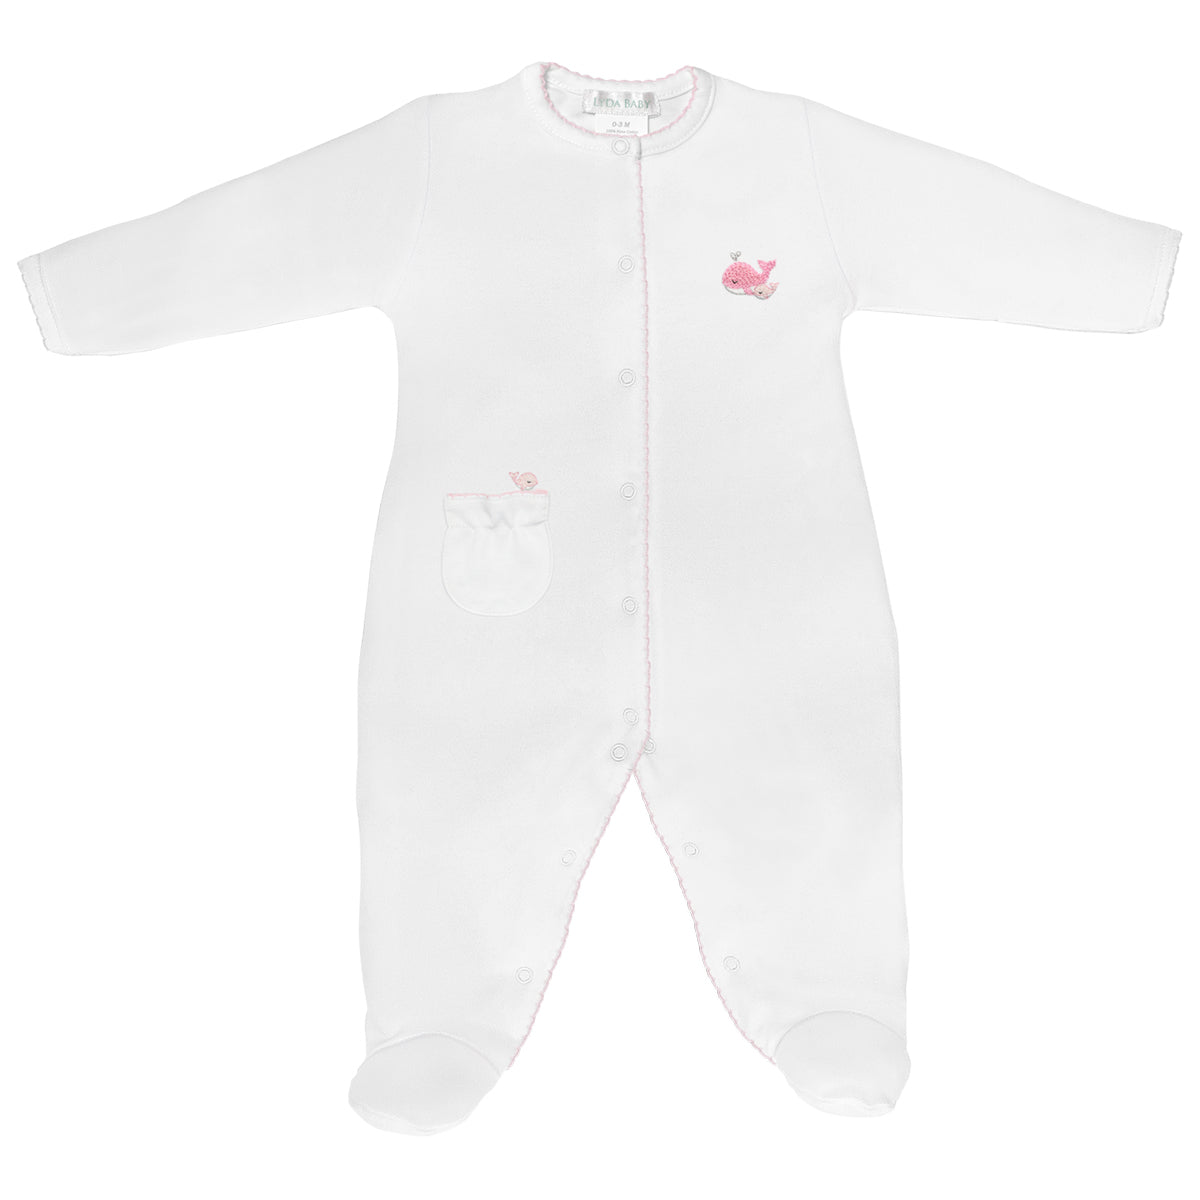 PIMA COTTON-SWEET DREAMS EMBROIDERY FOOTIE GIRL